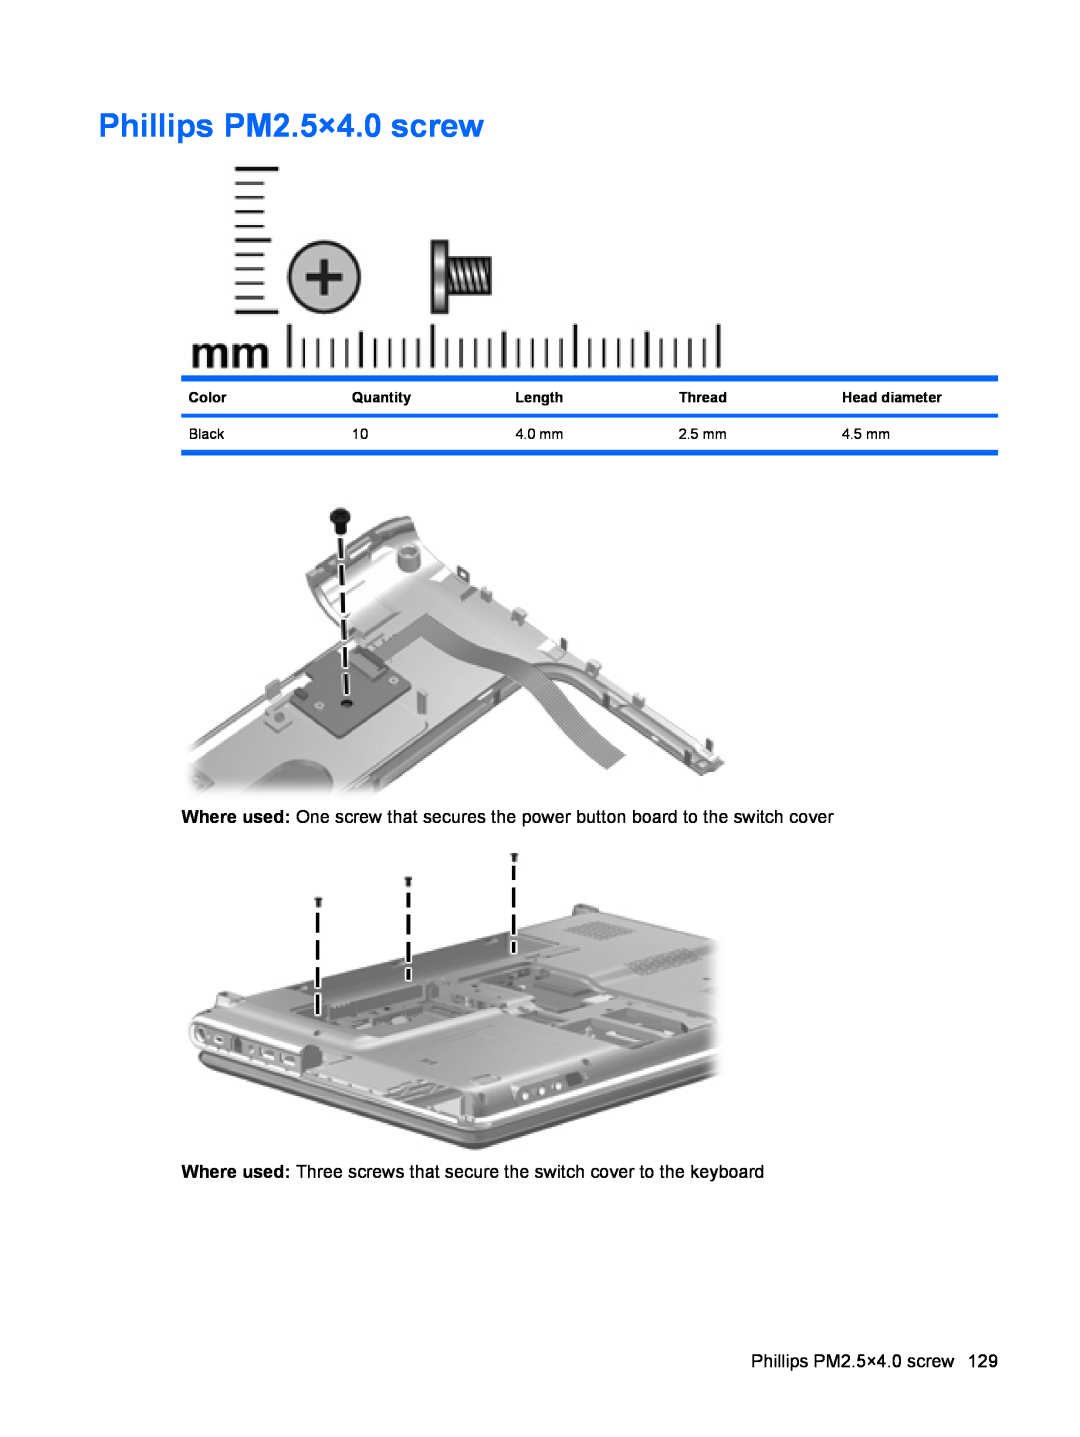 HP DV6 manual Phillips PM2.5×4.0 screw, Where used Three screws that secure the switch cover to the keyboard 